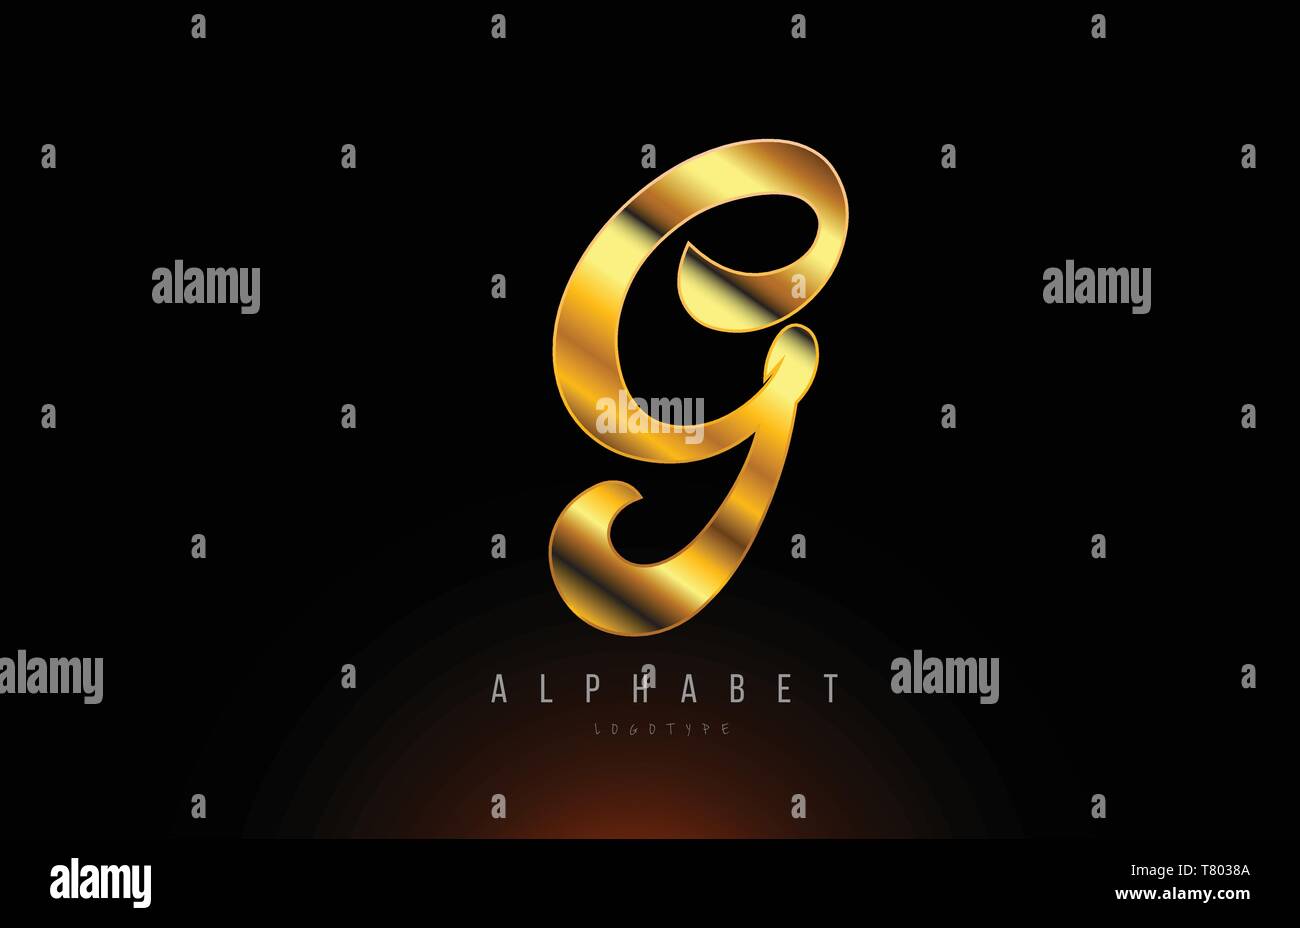 Gold Golden Letter G Logo Design With Metal Look Suitable For A Company Or Business Stock Vector Image Art Alamy